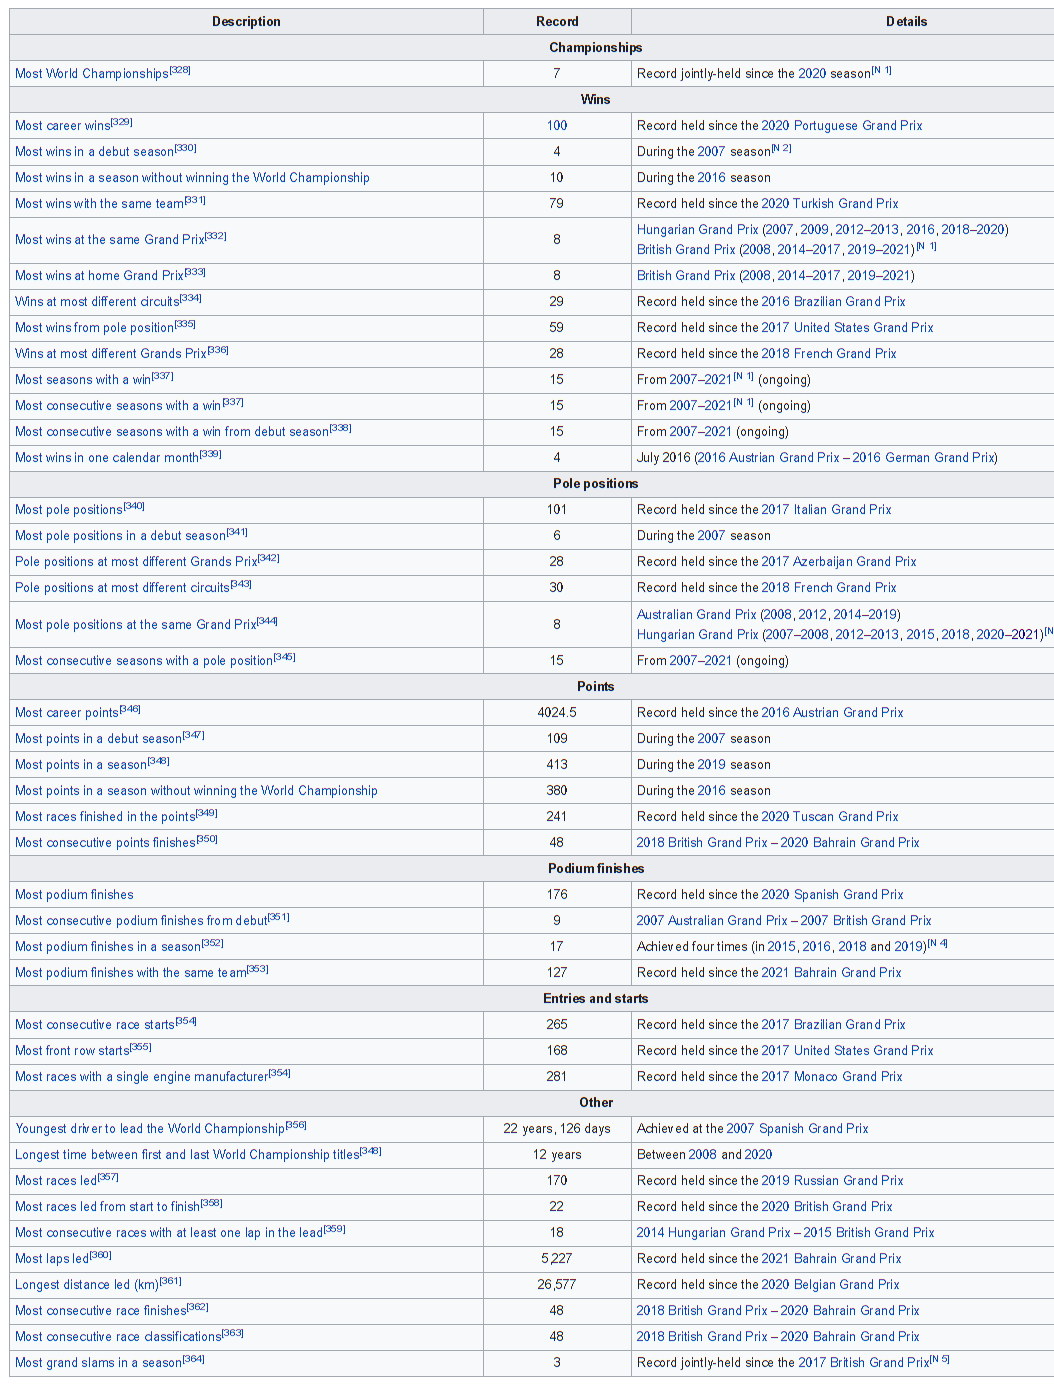 2021-09-26 18_01_59-List of career achievements by Lewis Hamilton - Wikipedia.png